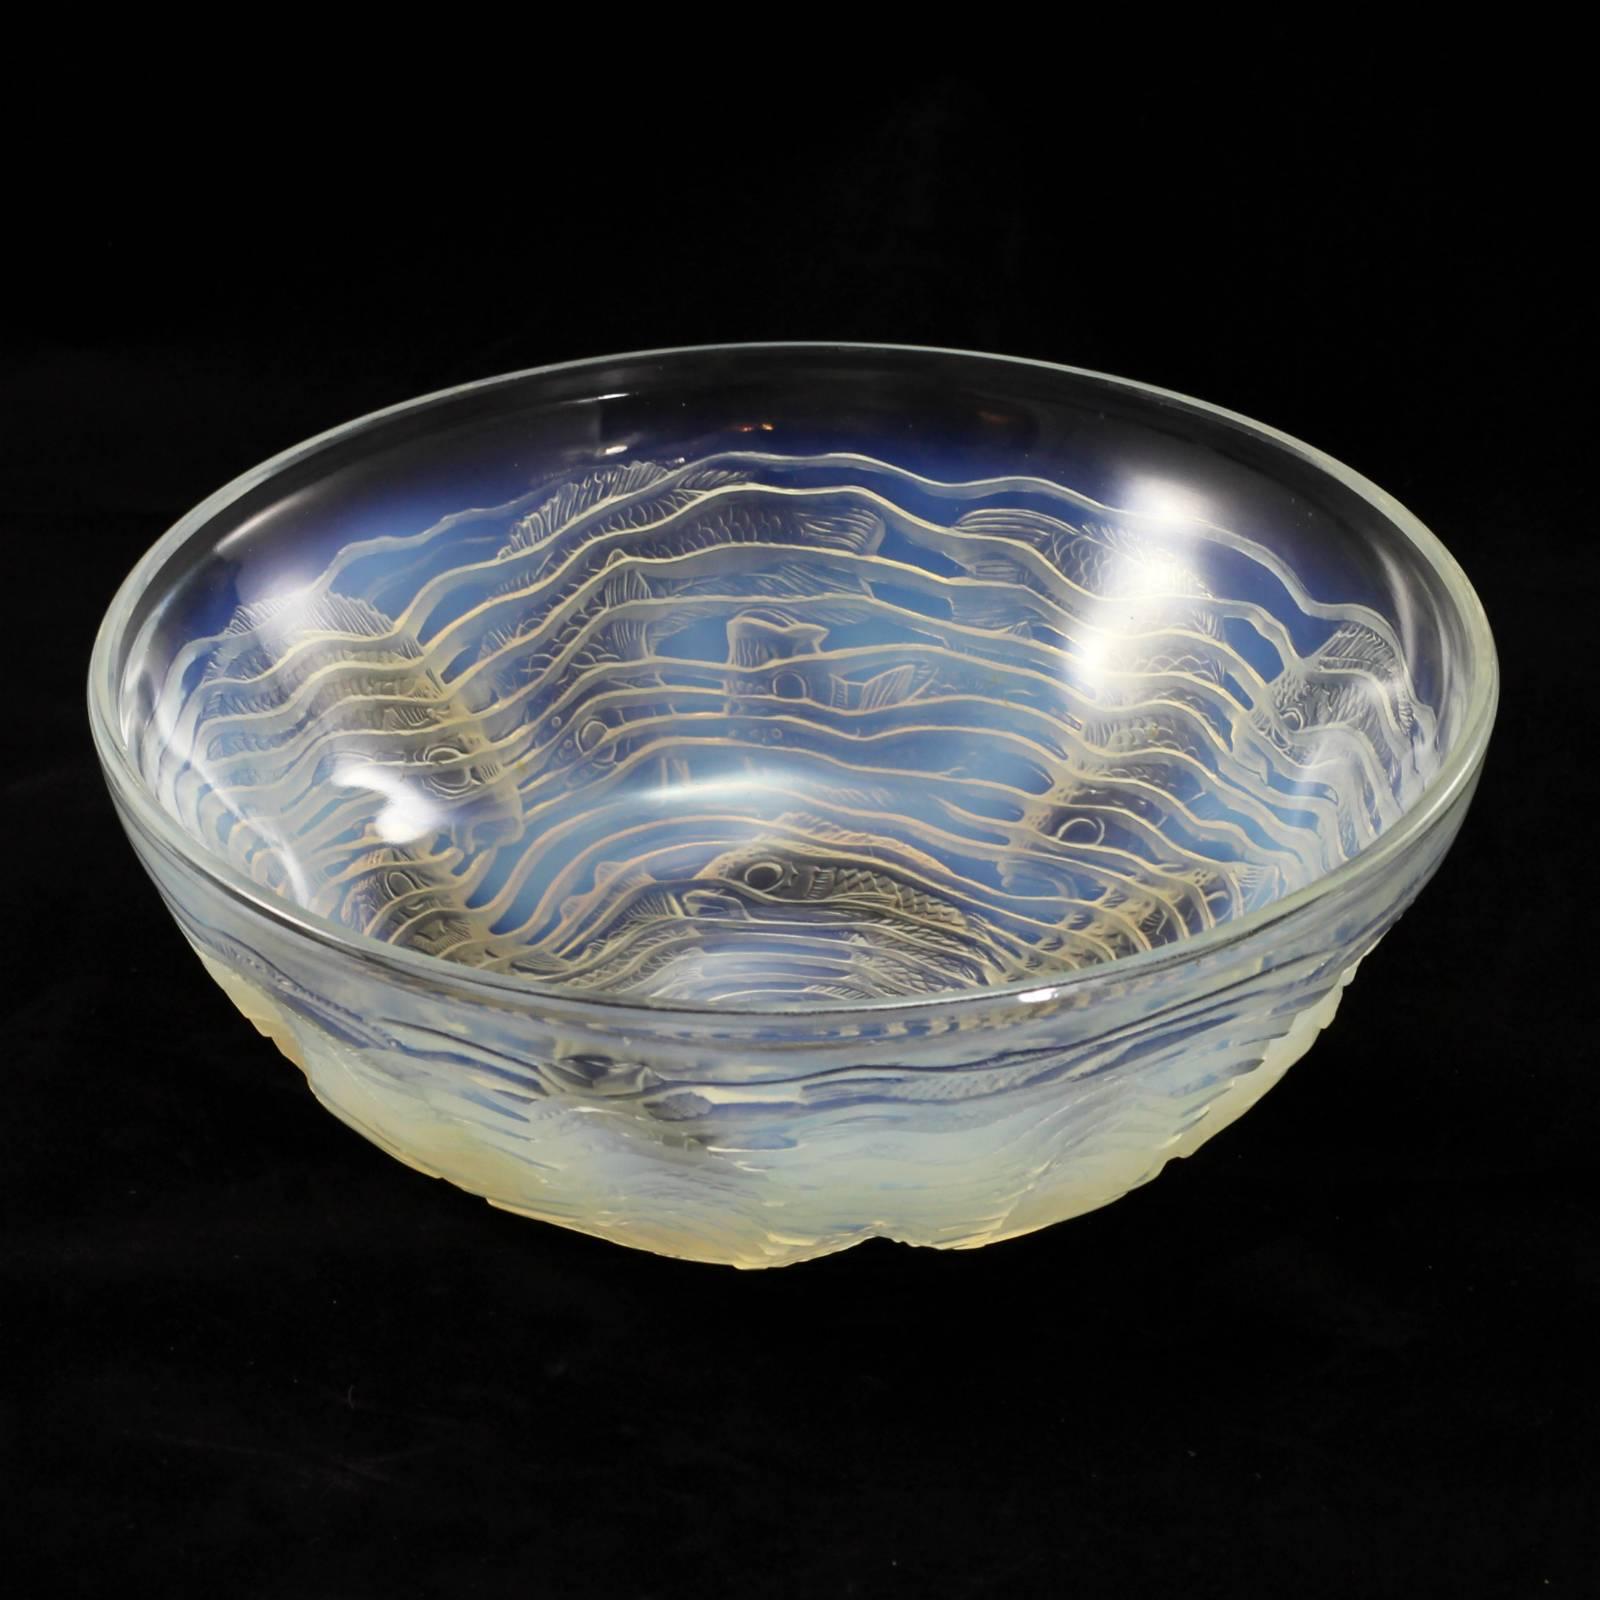 An early 20th century Art Deco glass bowl in the 'Dauphin' pattern by René Lalique. The opalescent glass displays varying hues of blue and green throughout the aquatic motif of the bowl. The piece is decorated with a spiral 'wave' which circles the